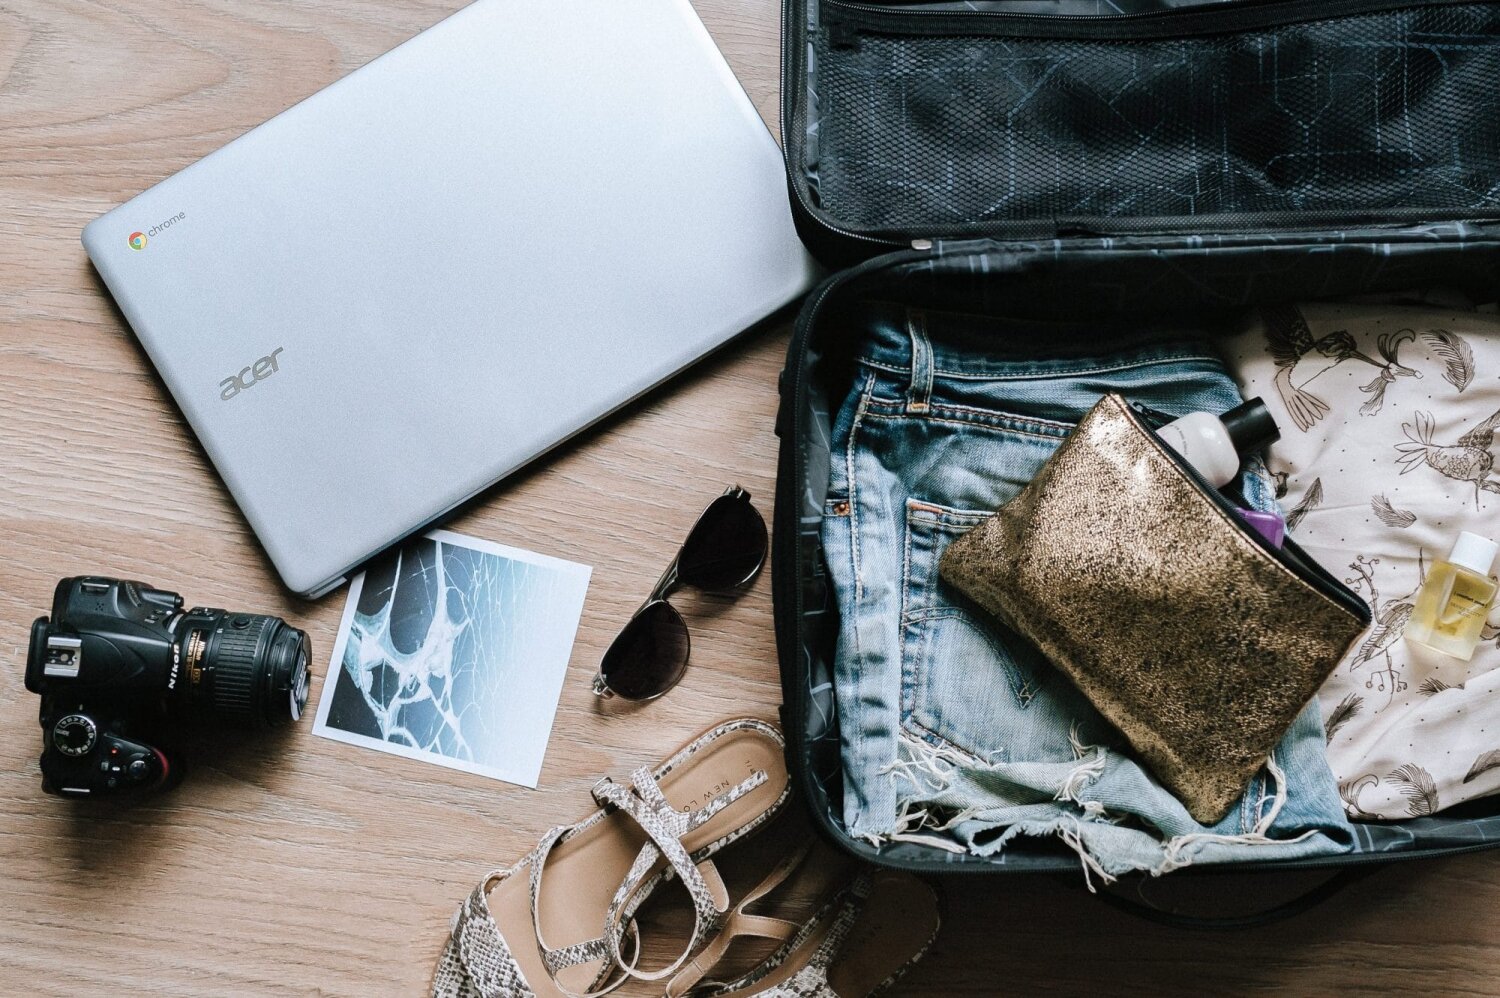 Here's a guide for every Solo Girl traveler out there to help you list the things to prep and pack before a trip.